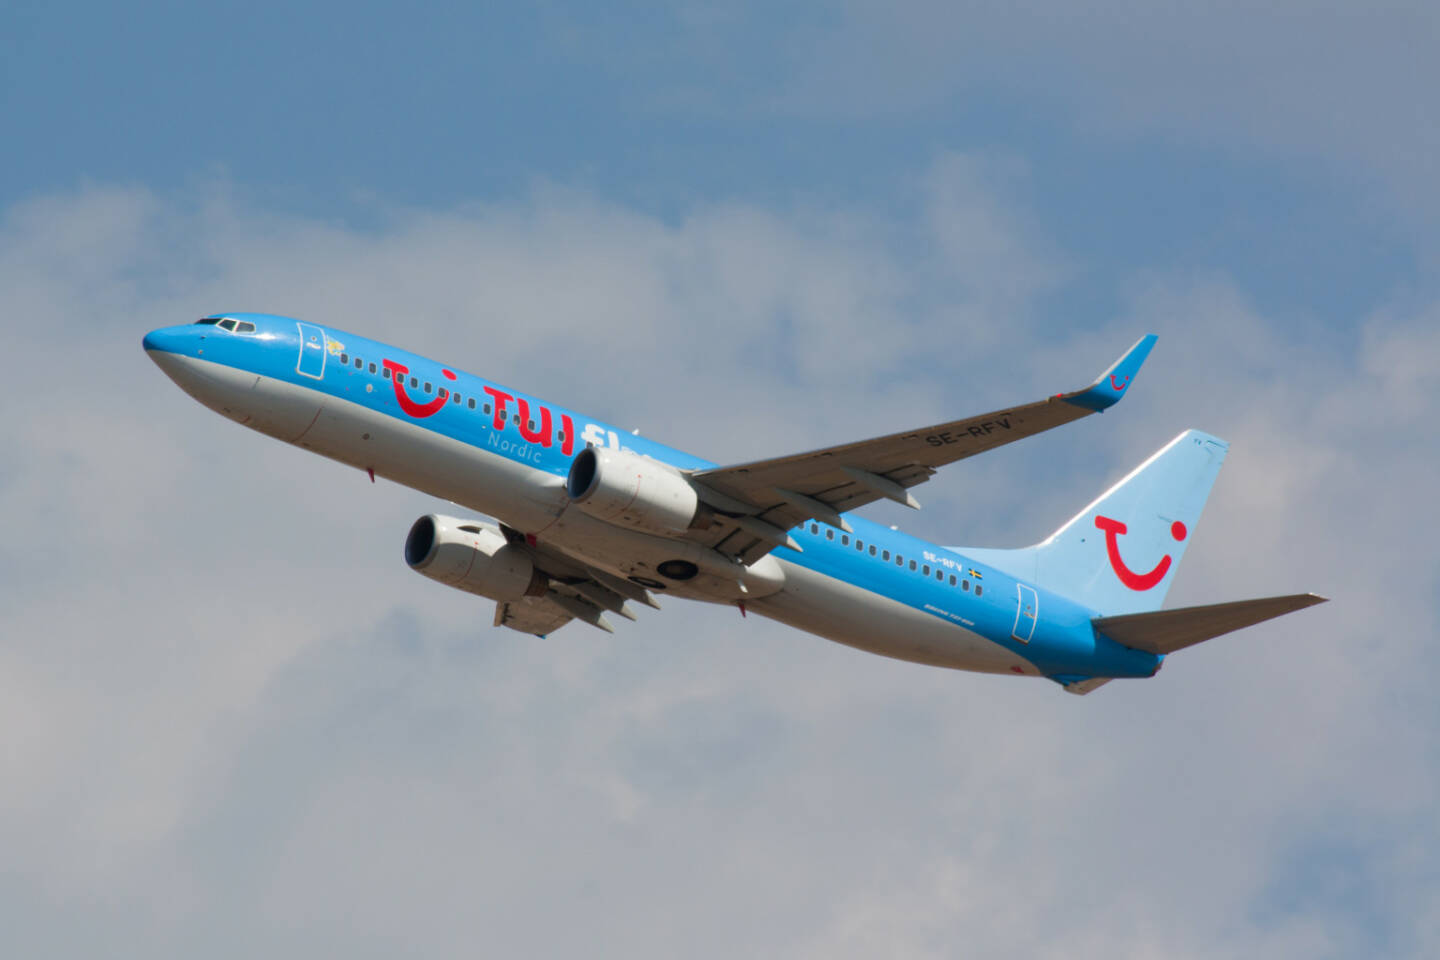 Tuifly Nordic B737, TUI  <a href=http://www.shutterstock.com/gallery-1462280p1.html?cr=00&pl=edit-00>Lukas Rebec</a> / <a href=http://www.shutterstock.com/editorial?cr=00&pl=edit-00>Shutterstock.com</a>